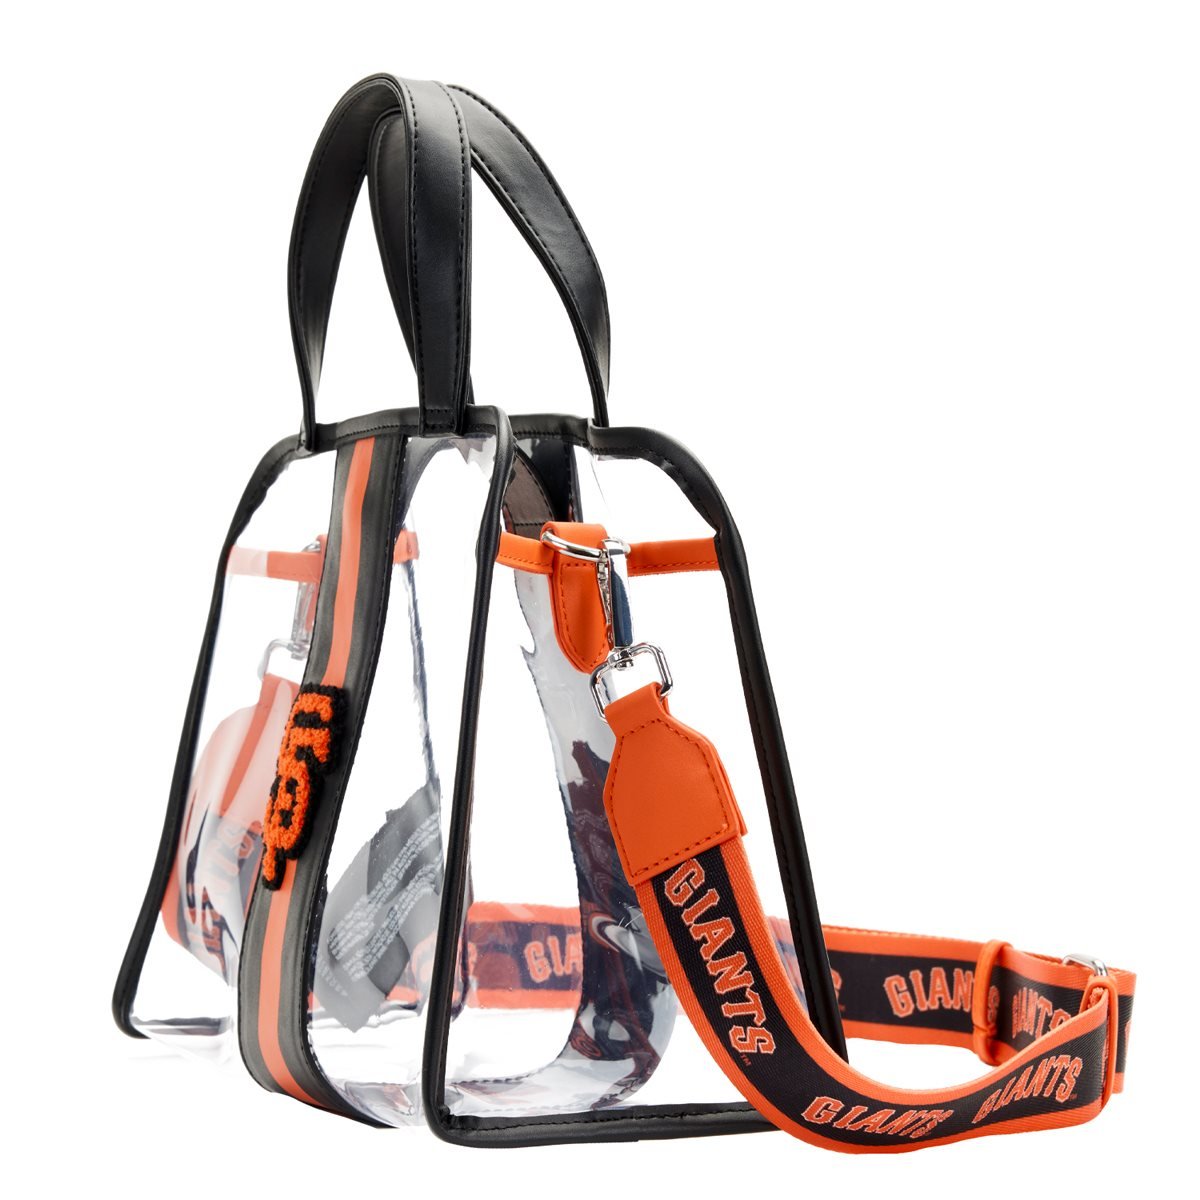 Officially Licensed MLB Fold Over Crossbody Purse - San Diego